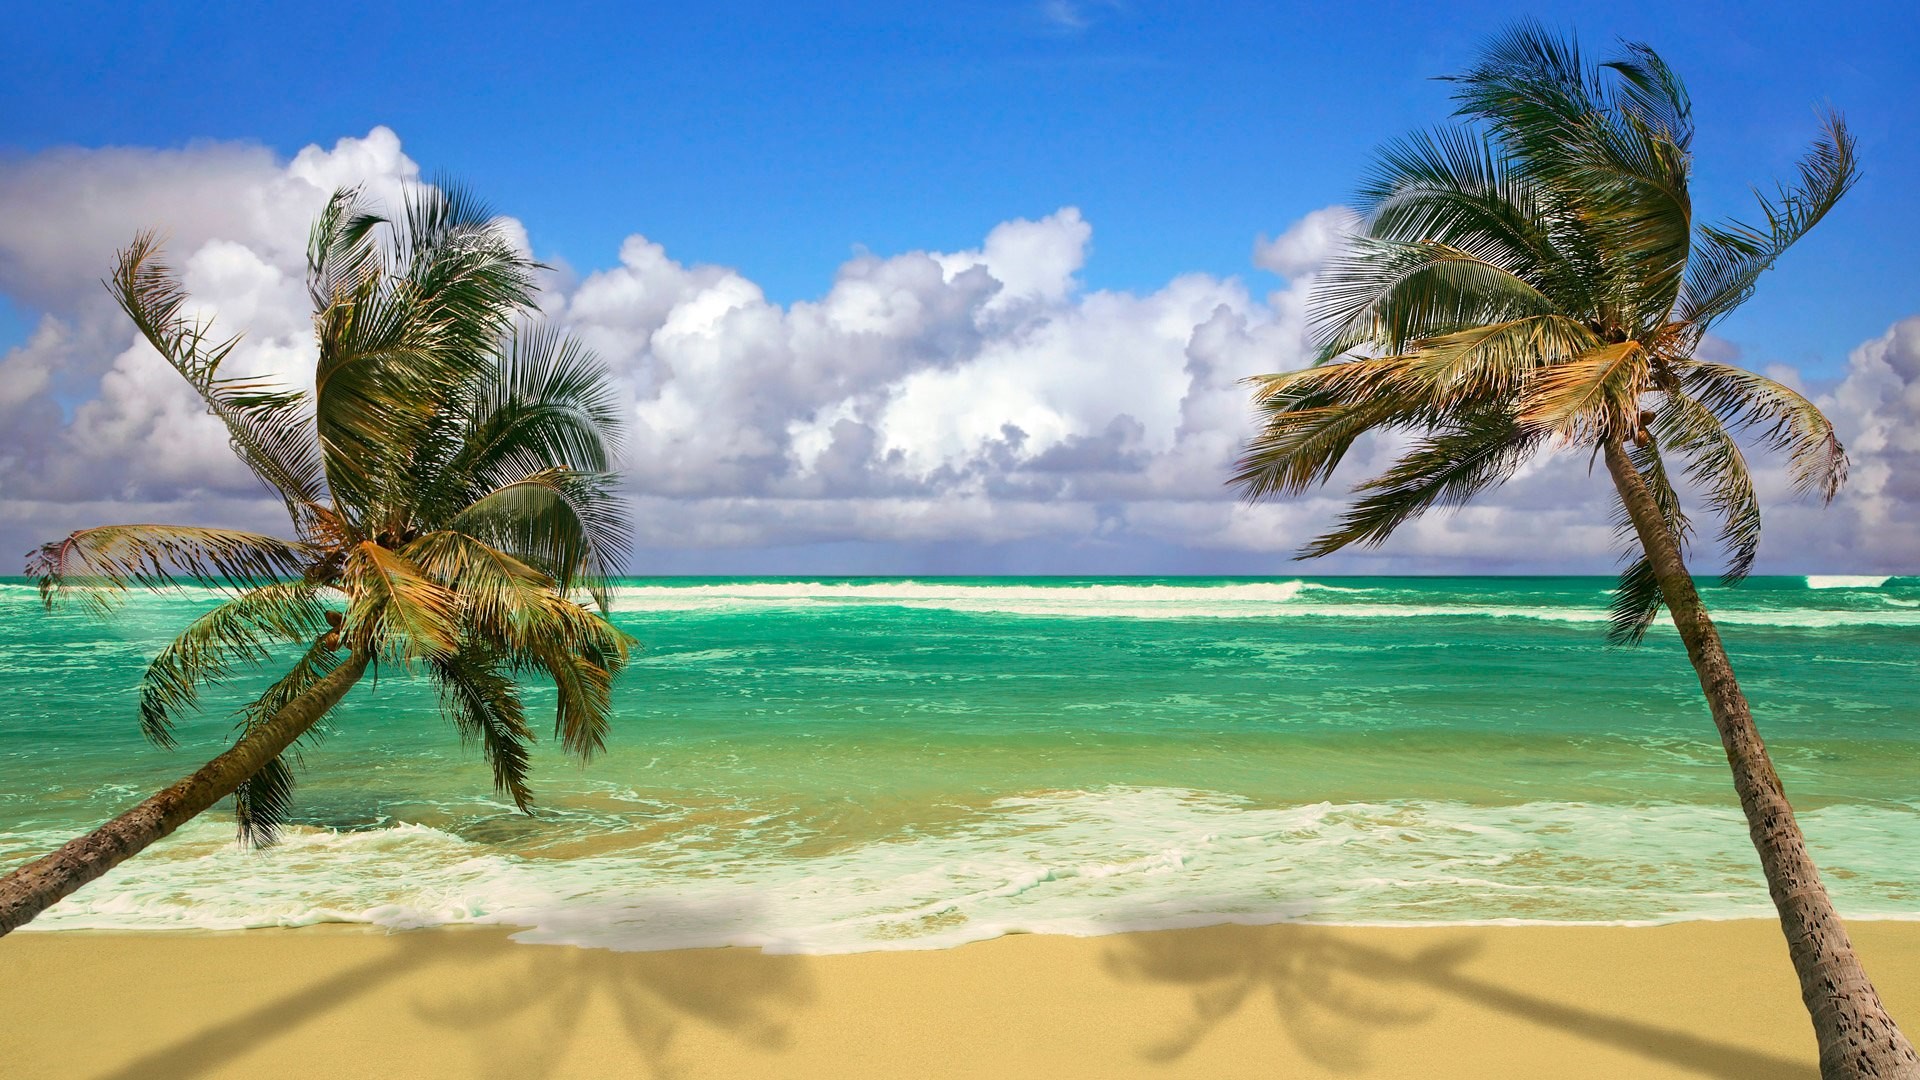 1920x1080 ... scenes android; 25 ocean wallpapers beach backgrounds images  freecreatives ...